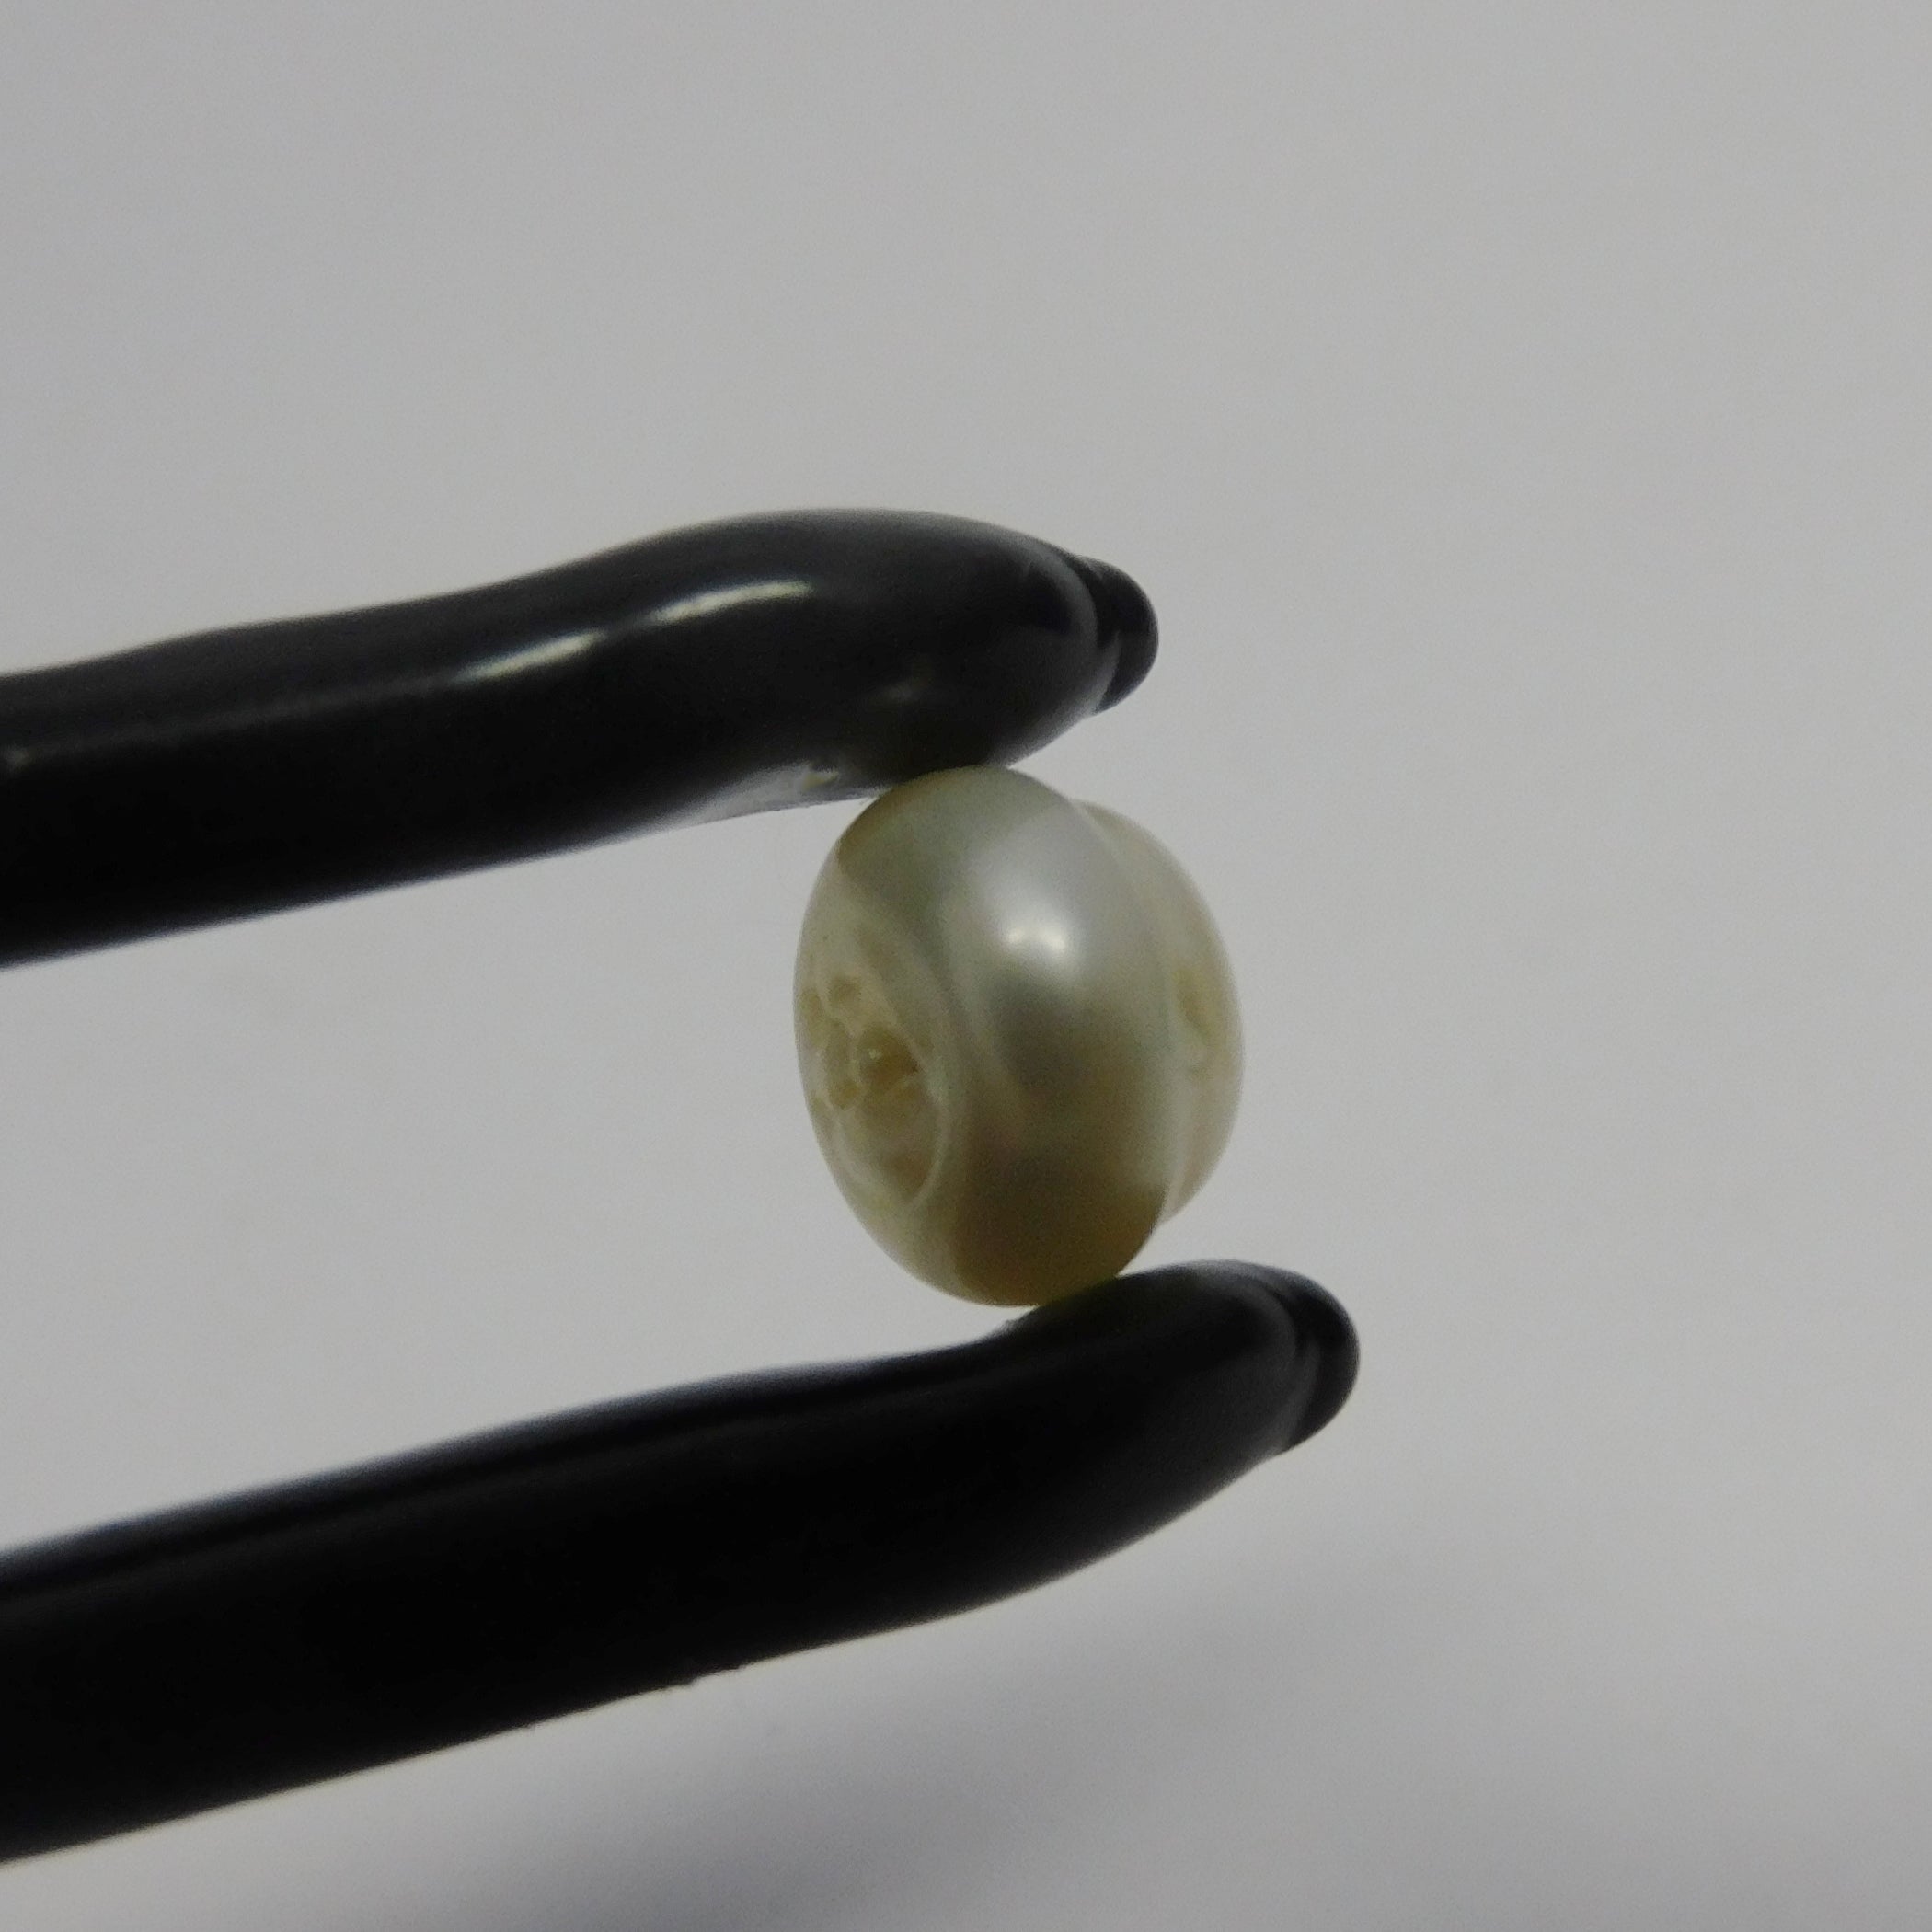 Mother's Day Special Offer !! Genuine Fresh Water Pearl 3.95 Carat Natural Certified White Pearl Loose Gemstone | Free Shipping With Extra Free Gift |